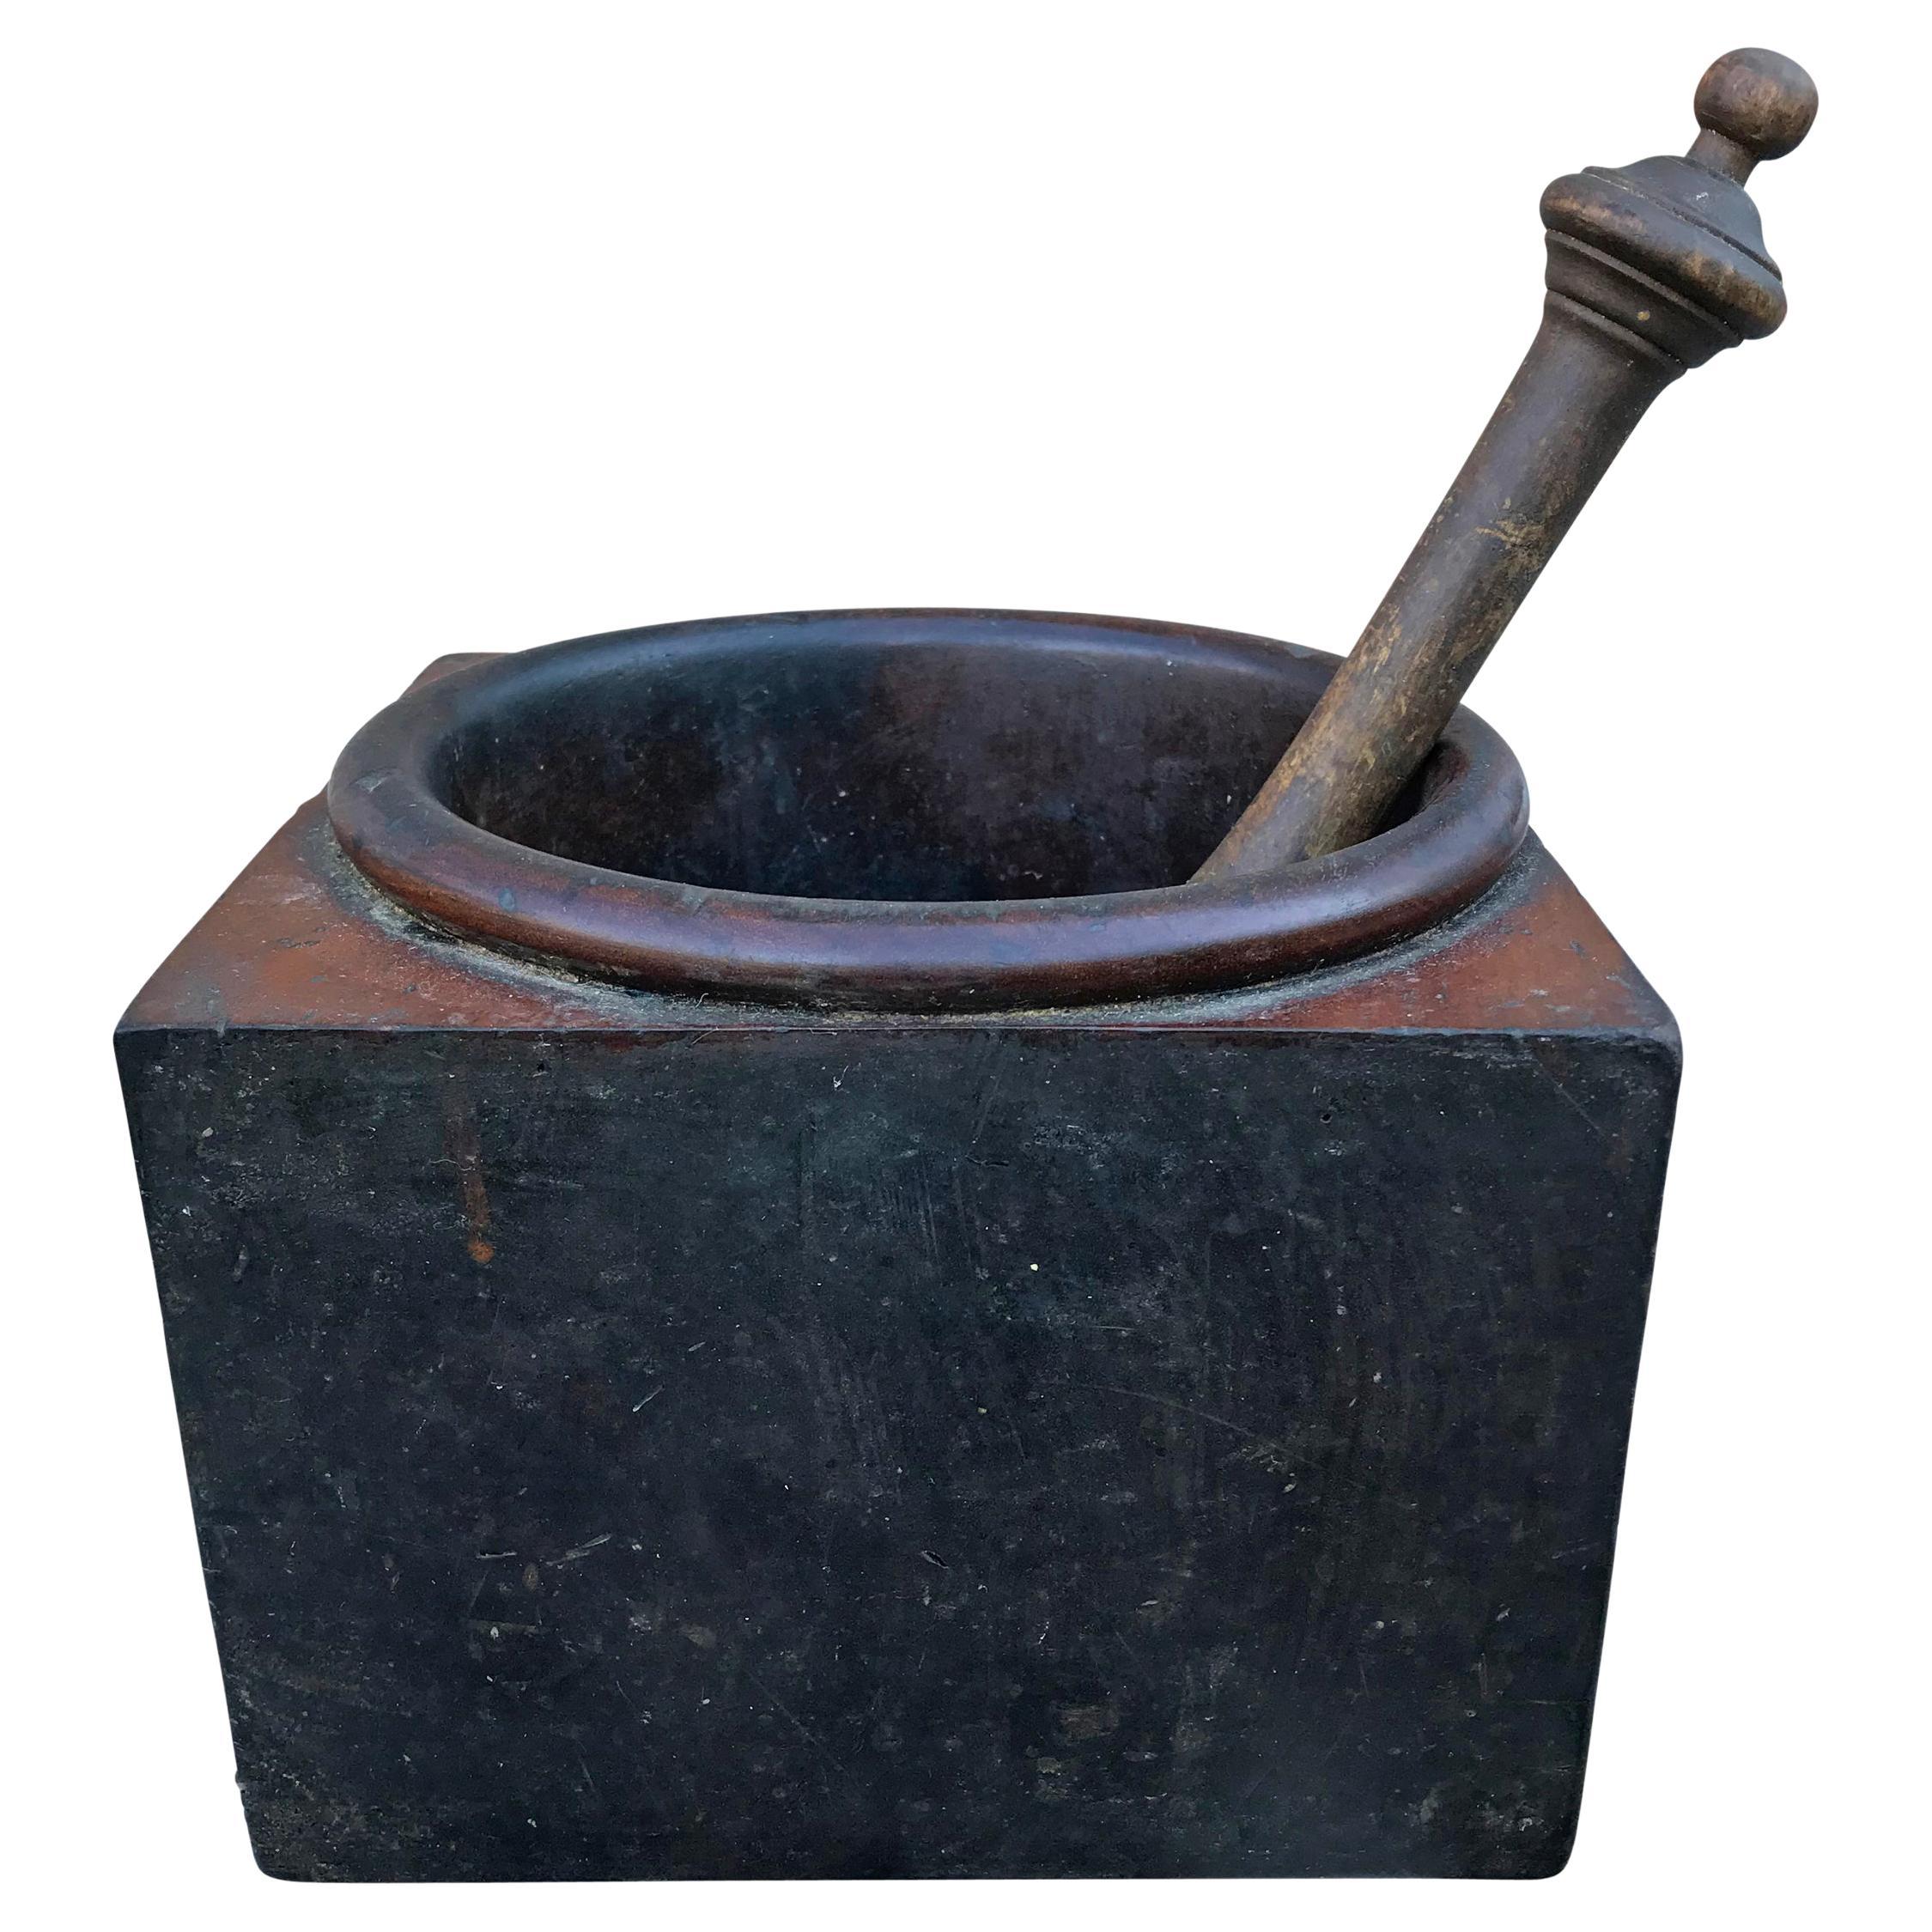 19th Century Kitchen Mortar and Pestle